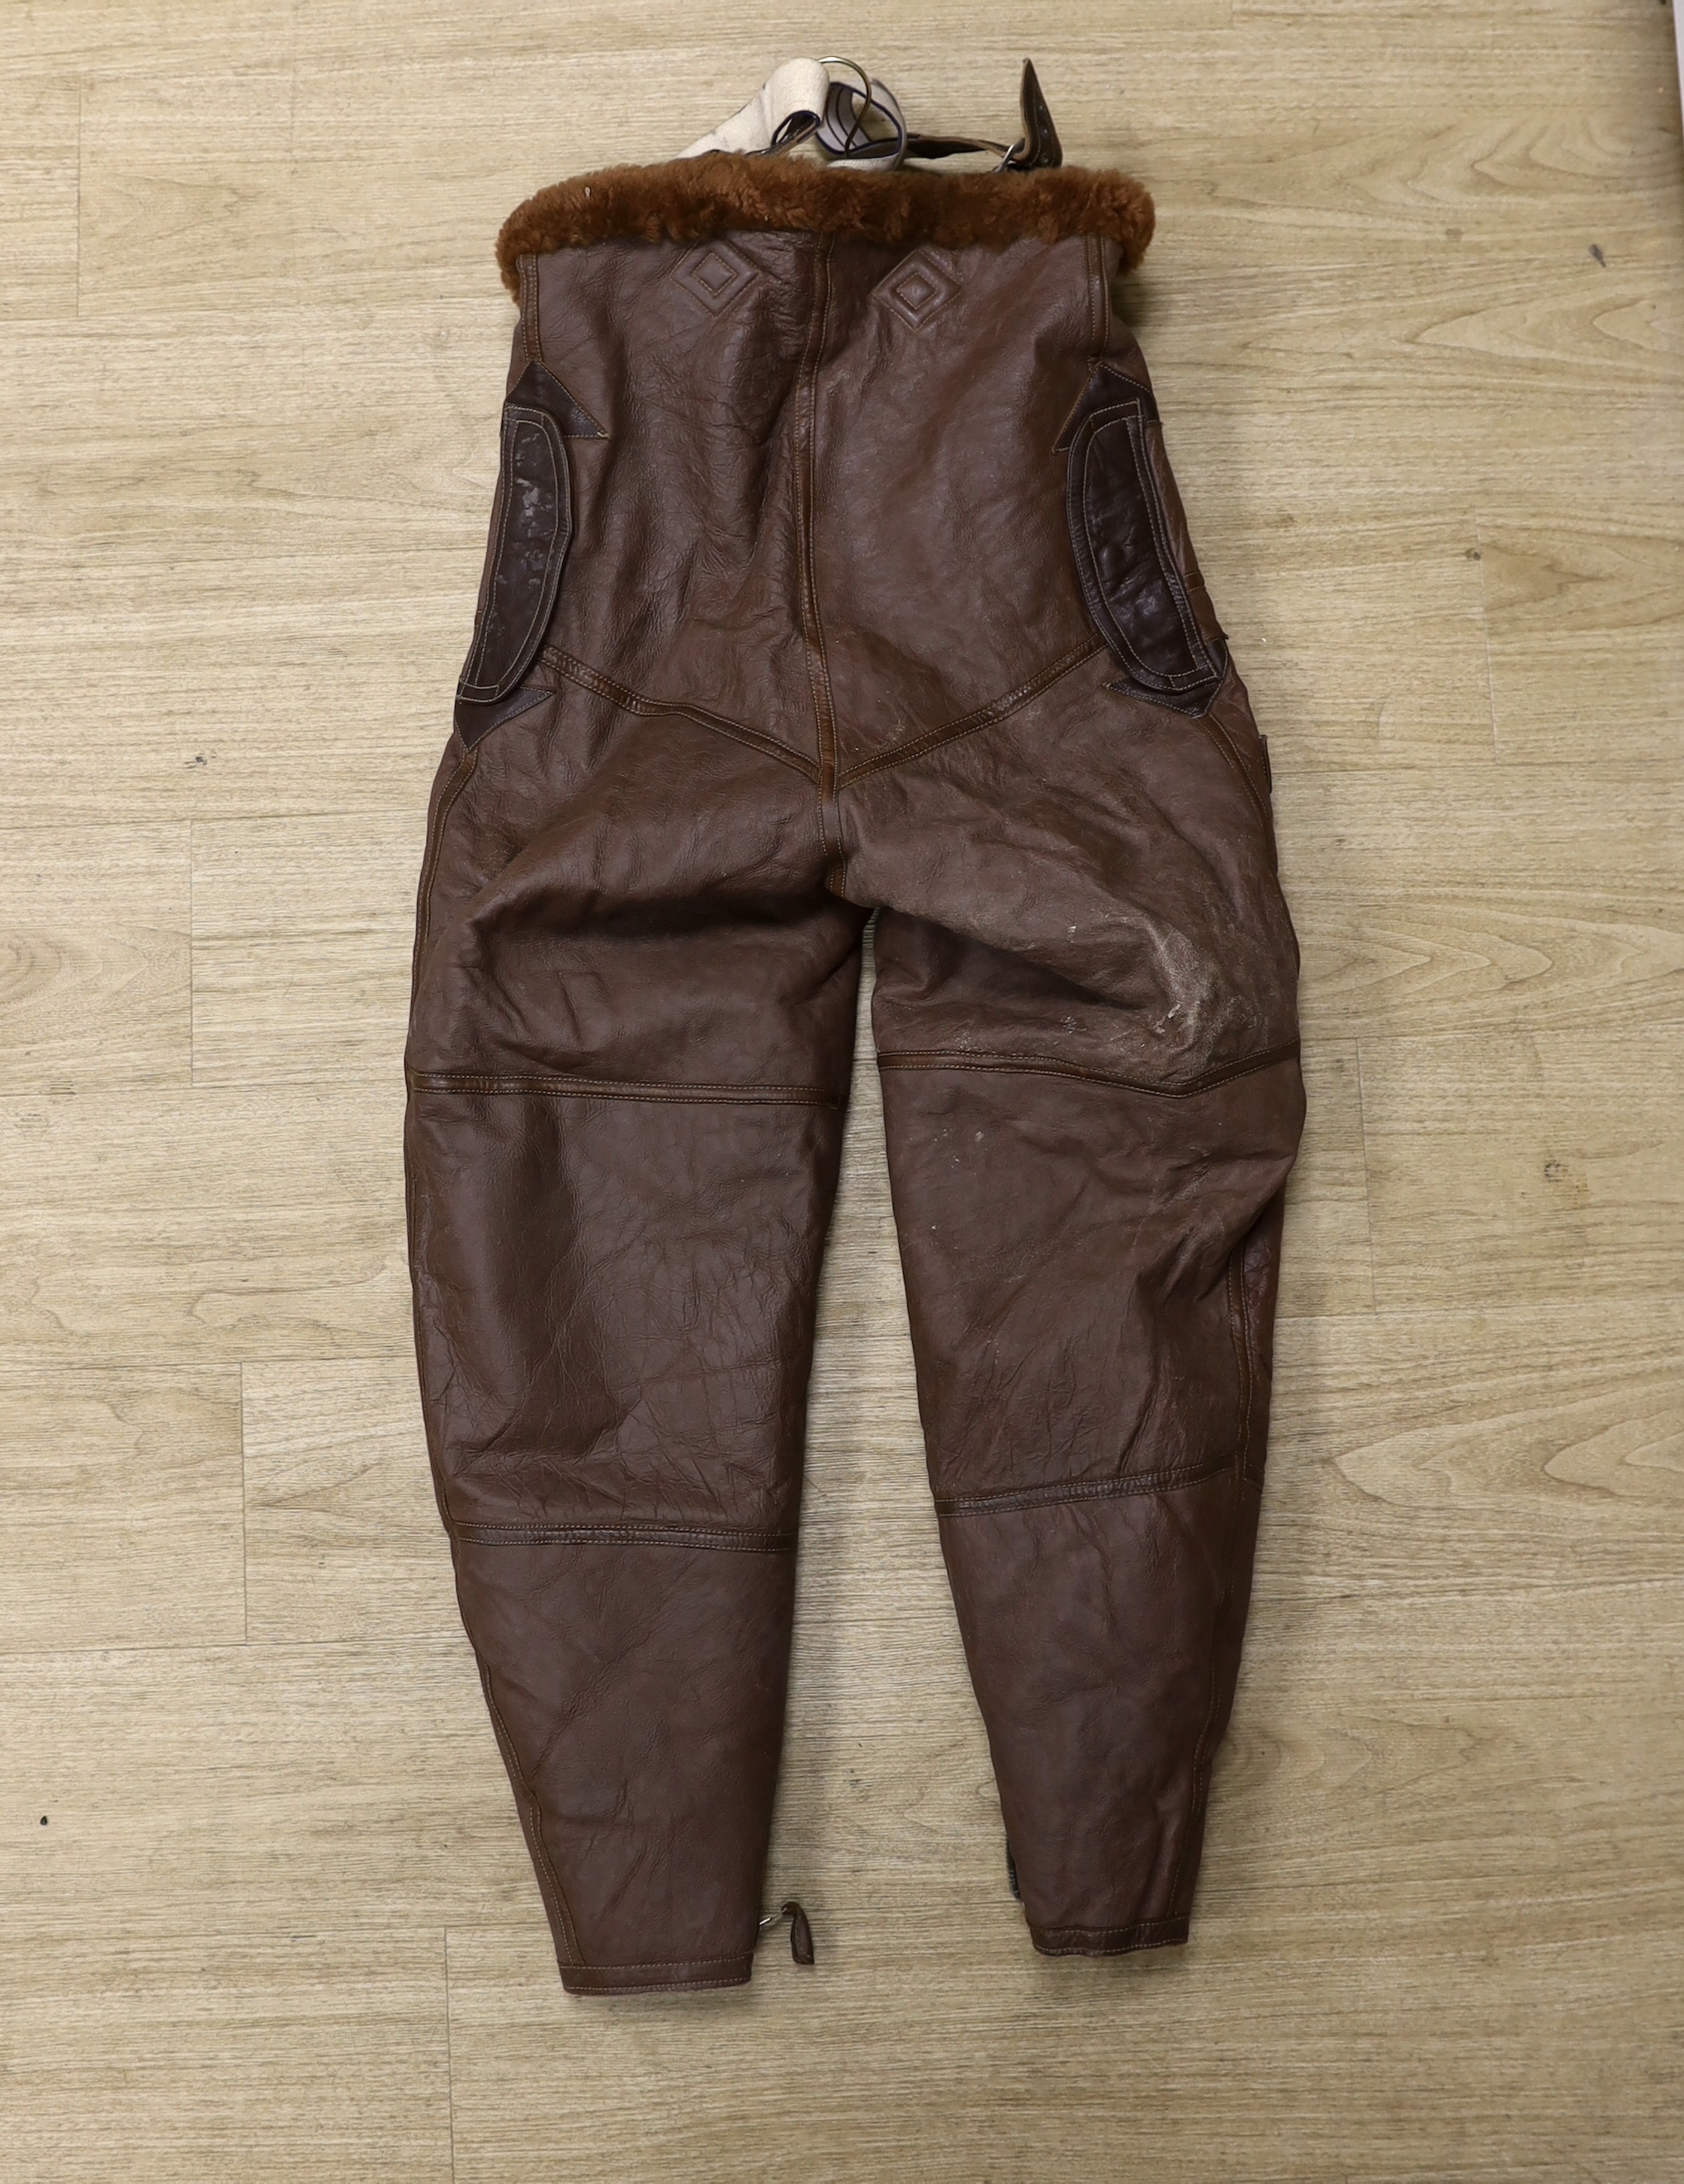 A pair of WWII Air Ministry issue RAF sheepskin breeches, with original label stating; ‘AM, Size: 5, Waist: 34-36, Seat: 40-42, Leg:32.5, 539778’, added in pen; ‘Brown’, provenance - by family descent